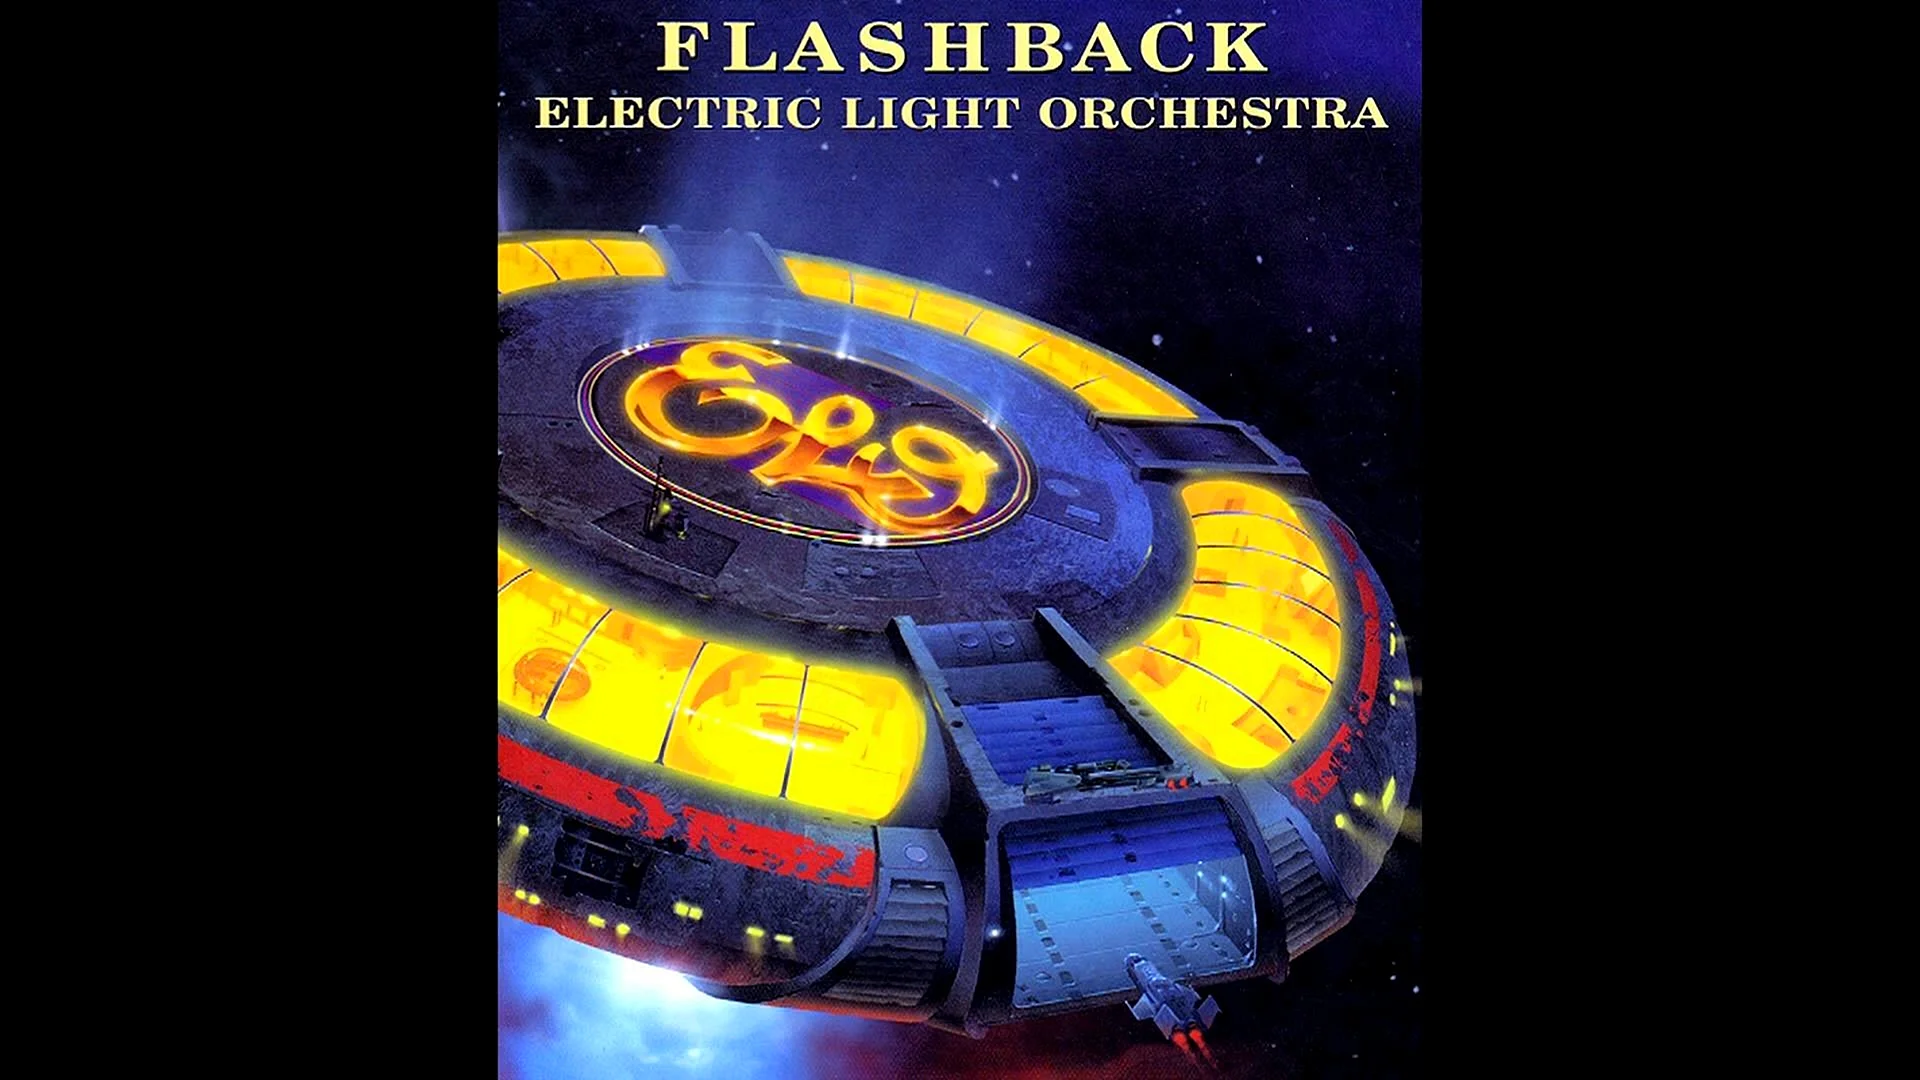 Electric Light Orchestra - Flashback Wallpaper